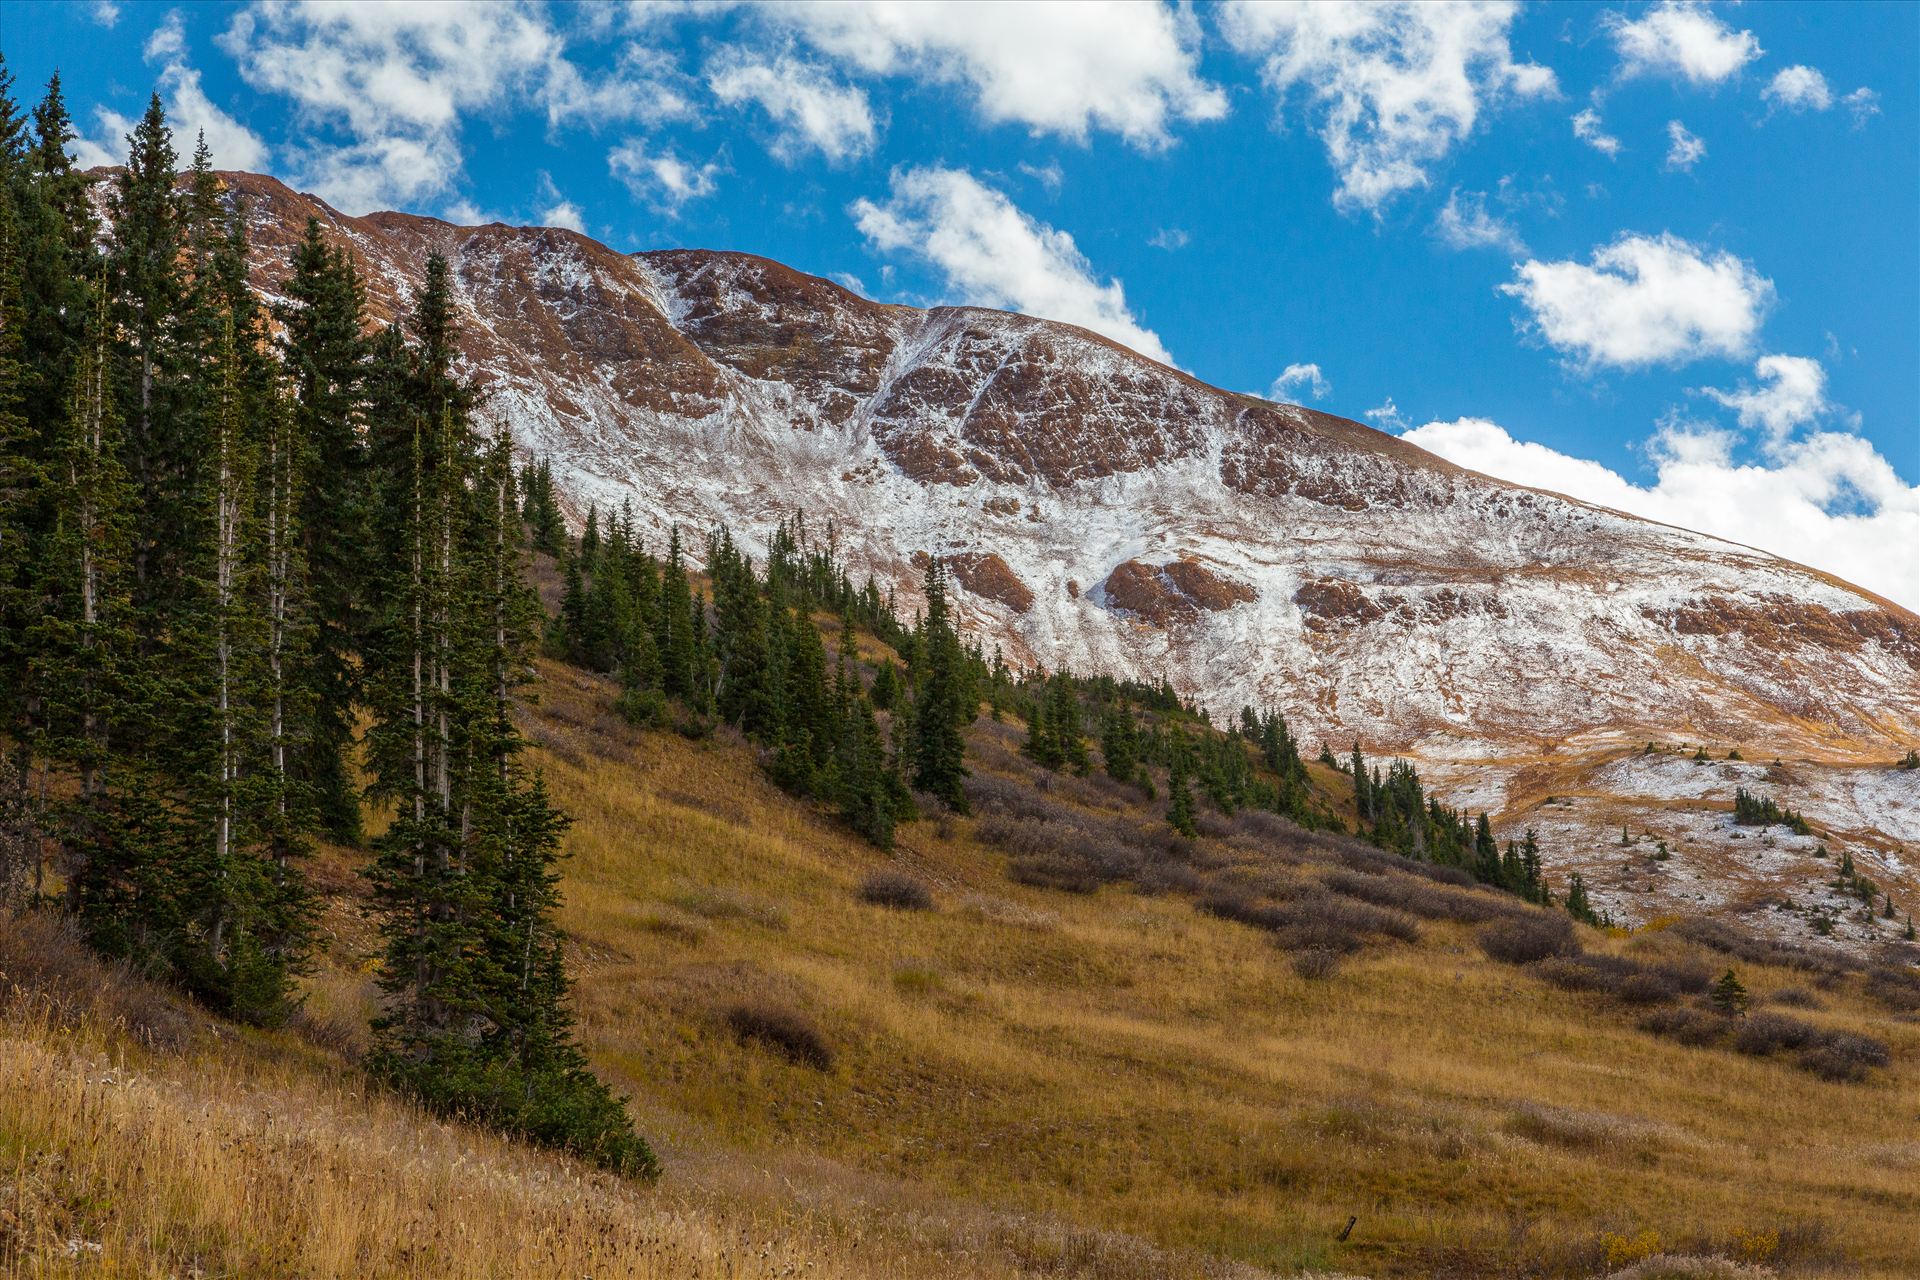 Snow at Mount Baldy Wilderness - Snow on the peaks at the Mount Baldy Wilderness area, near the summit. Taken from Schofield Pass in Crested Butte, Colorado. by Scott Smith Photos